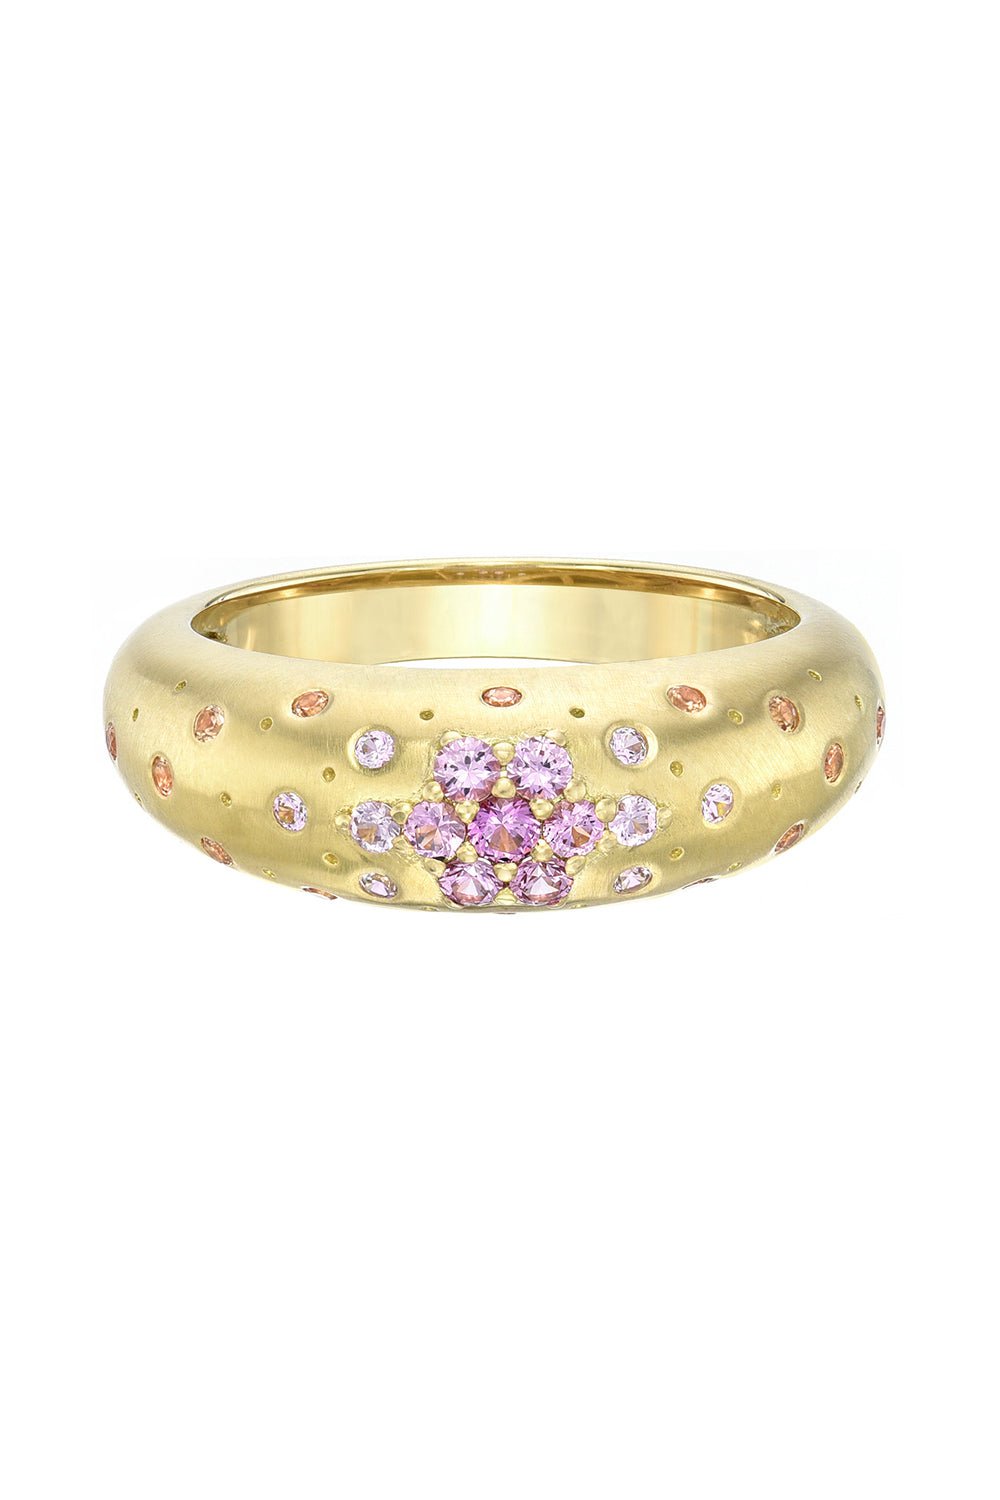 MEREDITH YOUNG-Sunset Stacking Ring-YELLOW GOLD